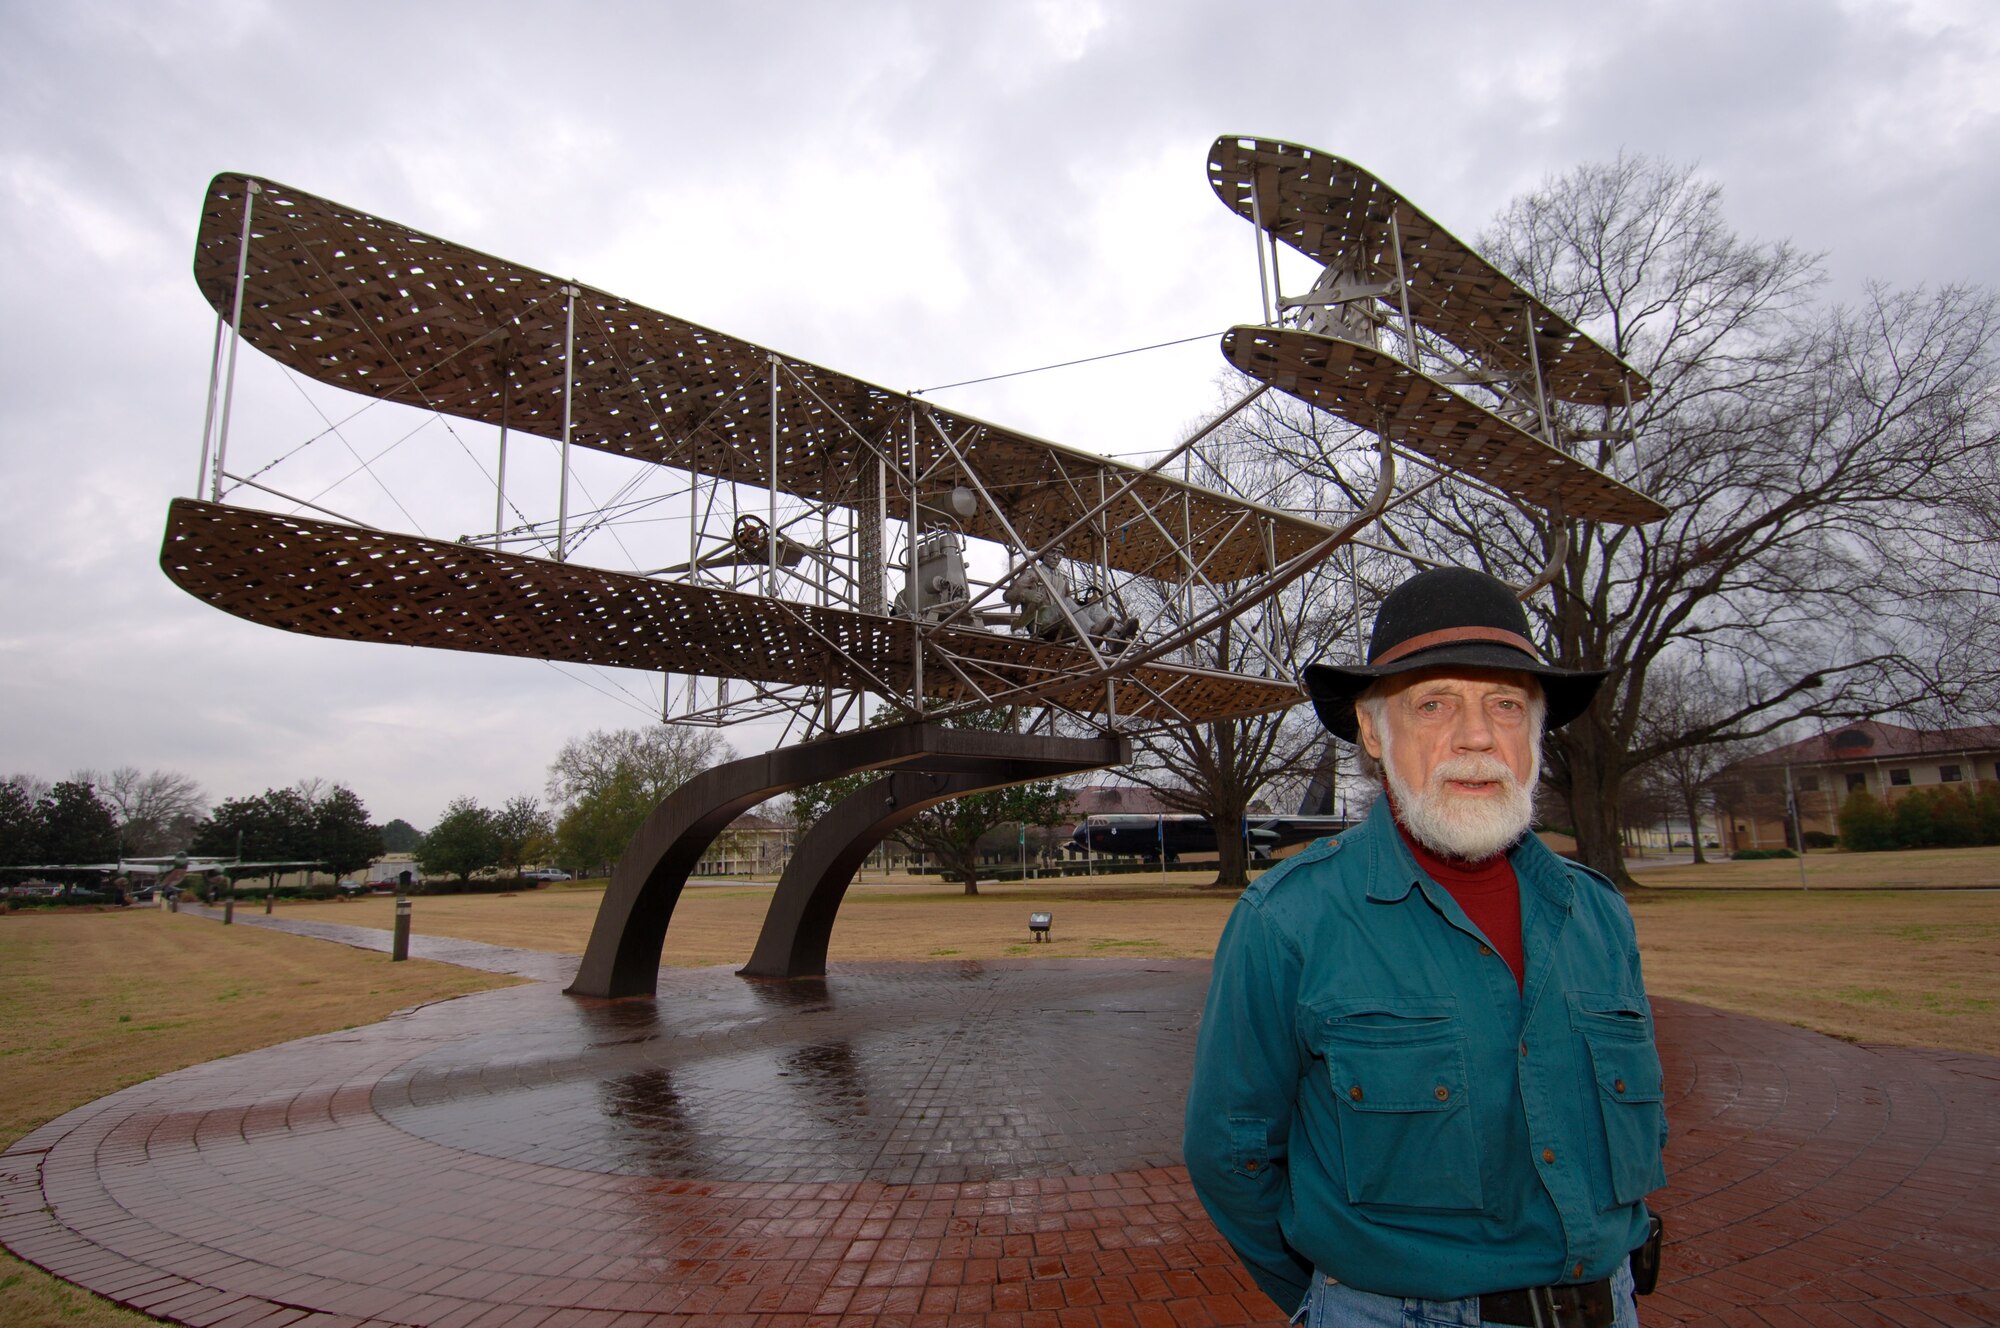 Larry Godwin, of Brundidge, Ala., stands before the Wright Flyer monument he designed and built 24 years ago for Maxwell’s Air Park. Mr. Godwin recently revisited his work while in Montgomery on business. (Air Force photo by Donna Burnett)